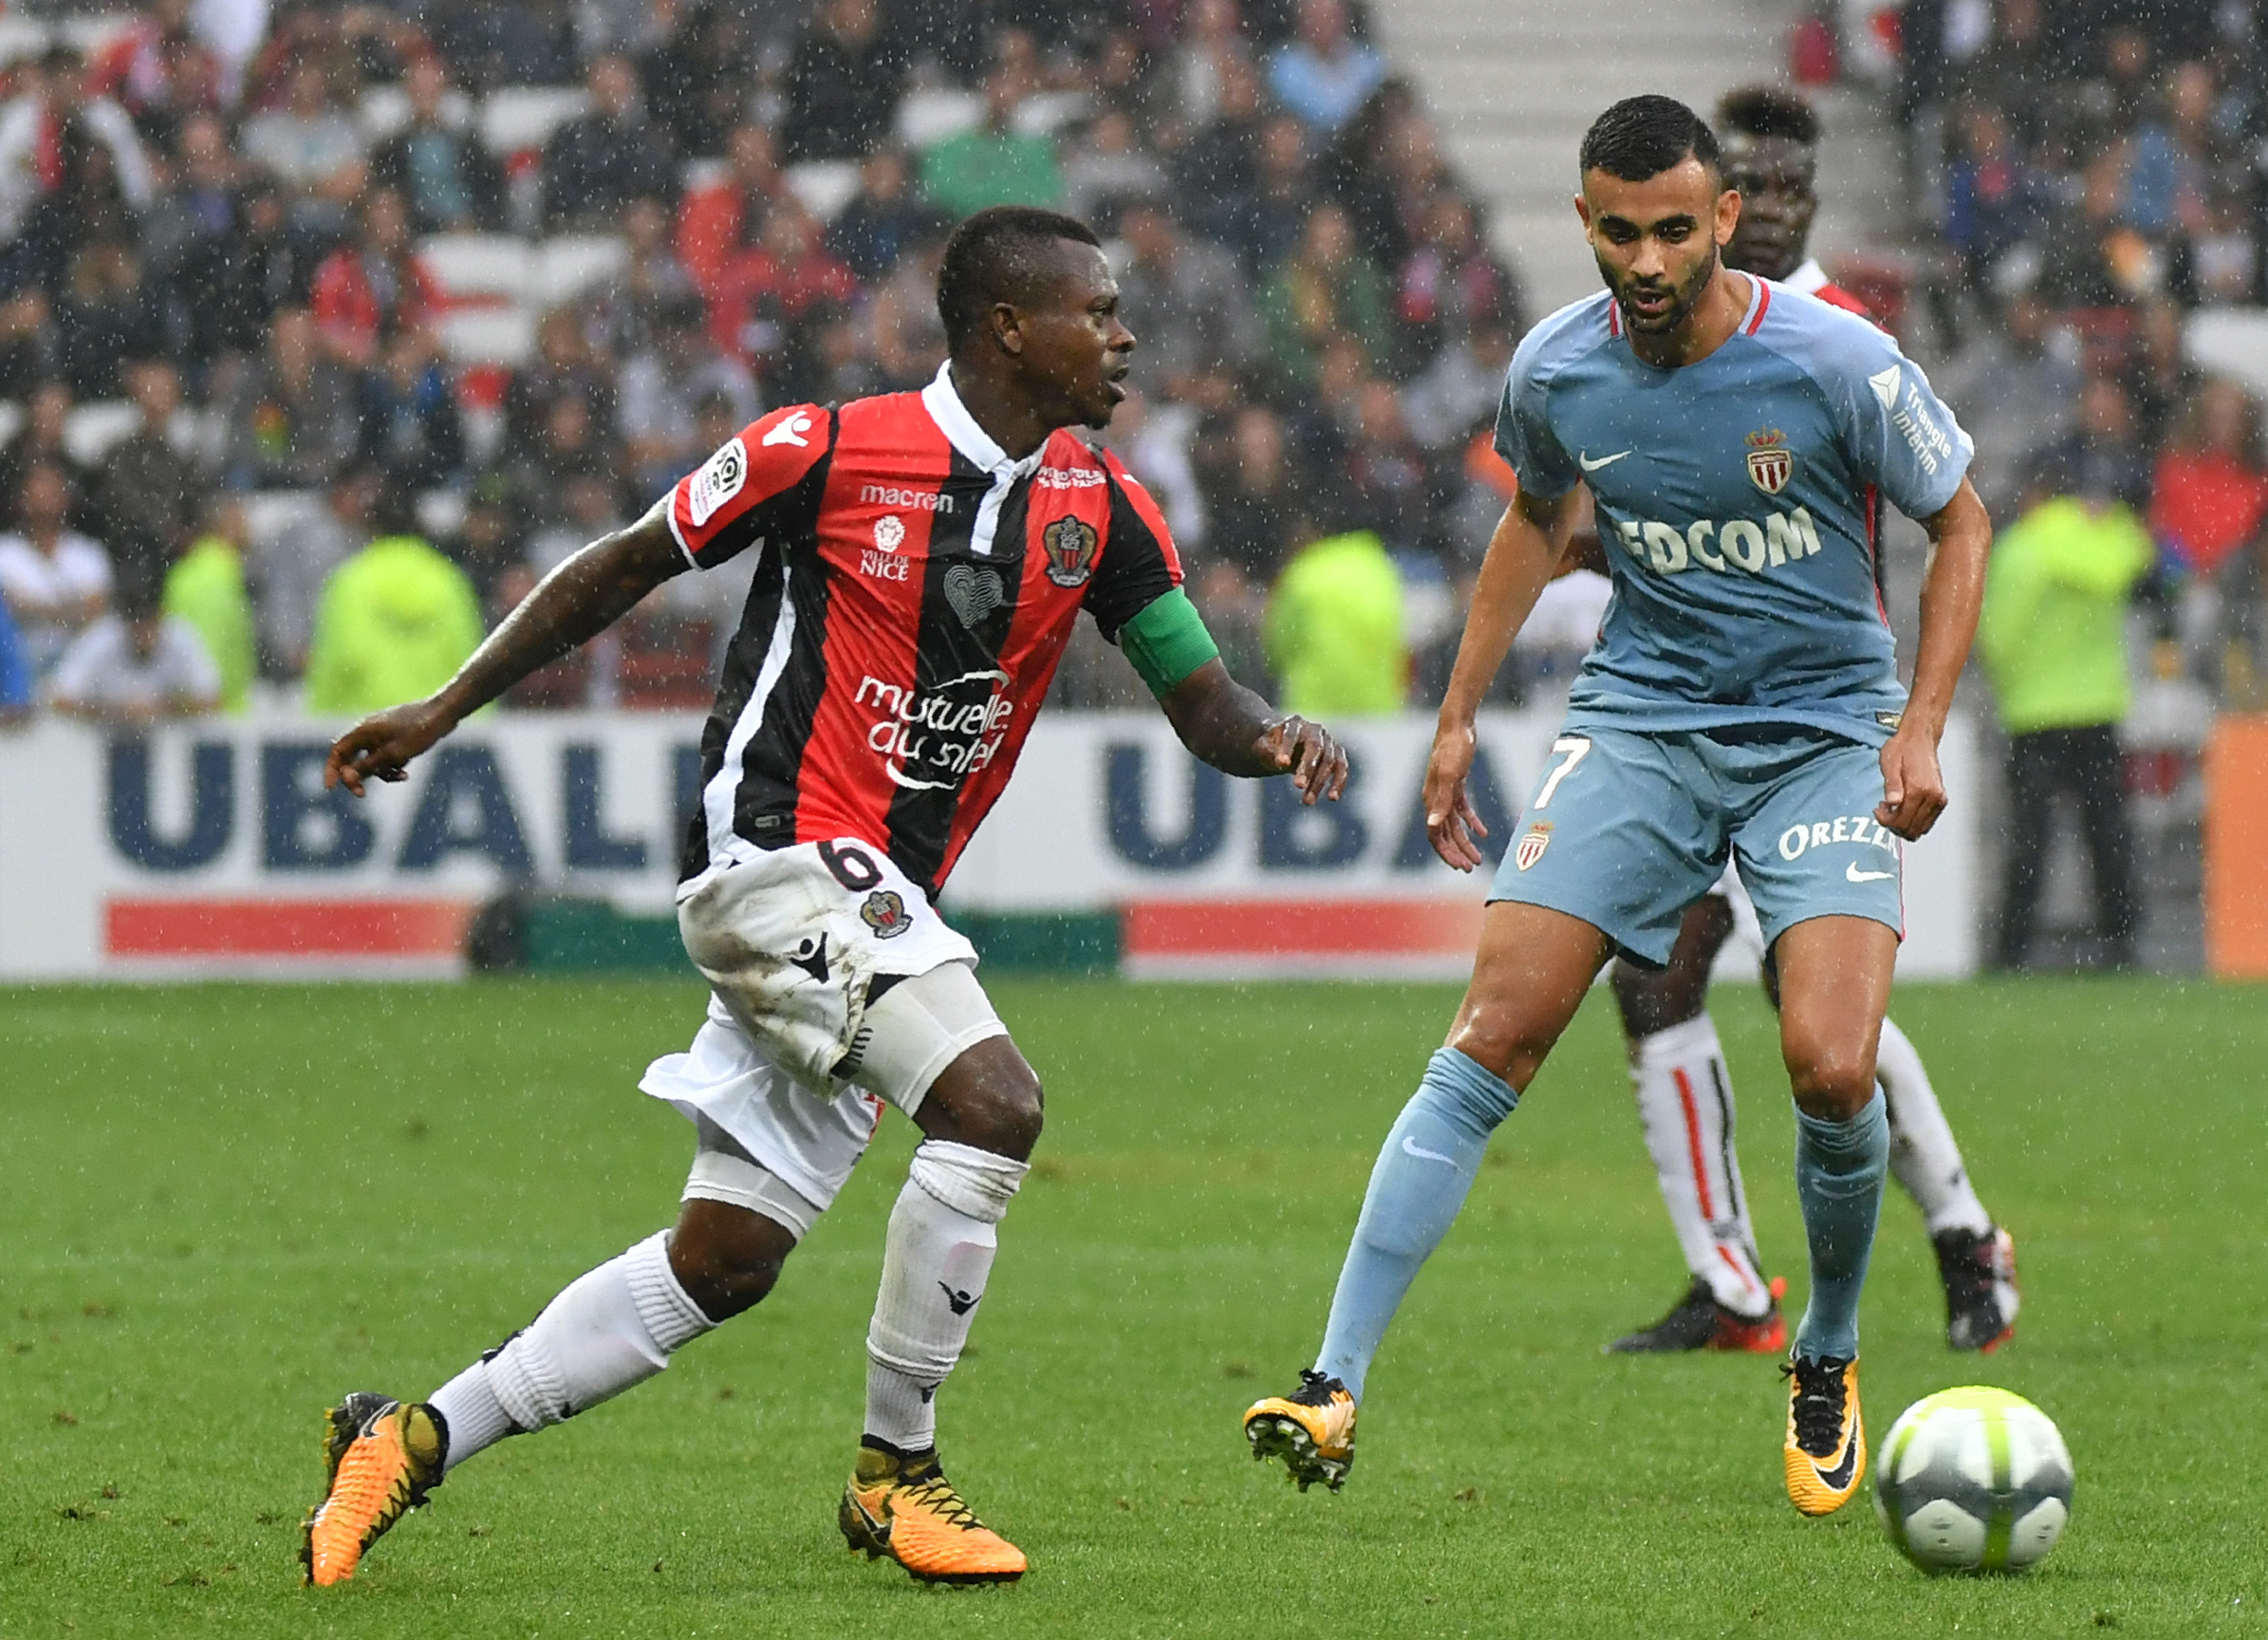 Nice's Ivorian midfielder Jean Michael Seri (L) vies with Monaco's French midfielder Rachid Ghezzal during the French L1 football match Nice (OGCN) vs Monaco (ASM) on September 9, 2017 at the "Allianz Riviera" stadium in Nice, southeastern France.   / AFP PHOTO / YANN COATSALIOU        (Photo credit should read YANN COATSALIOU/AFP/Getty Images)